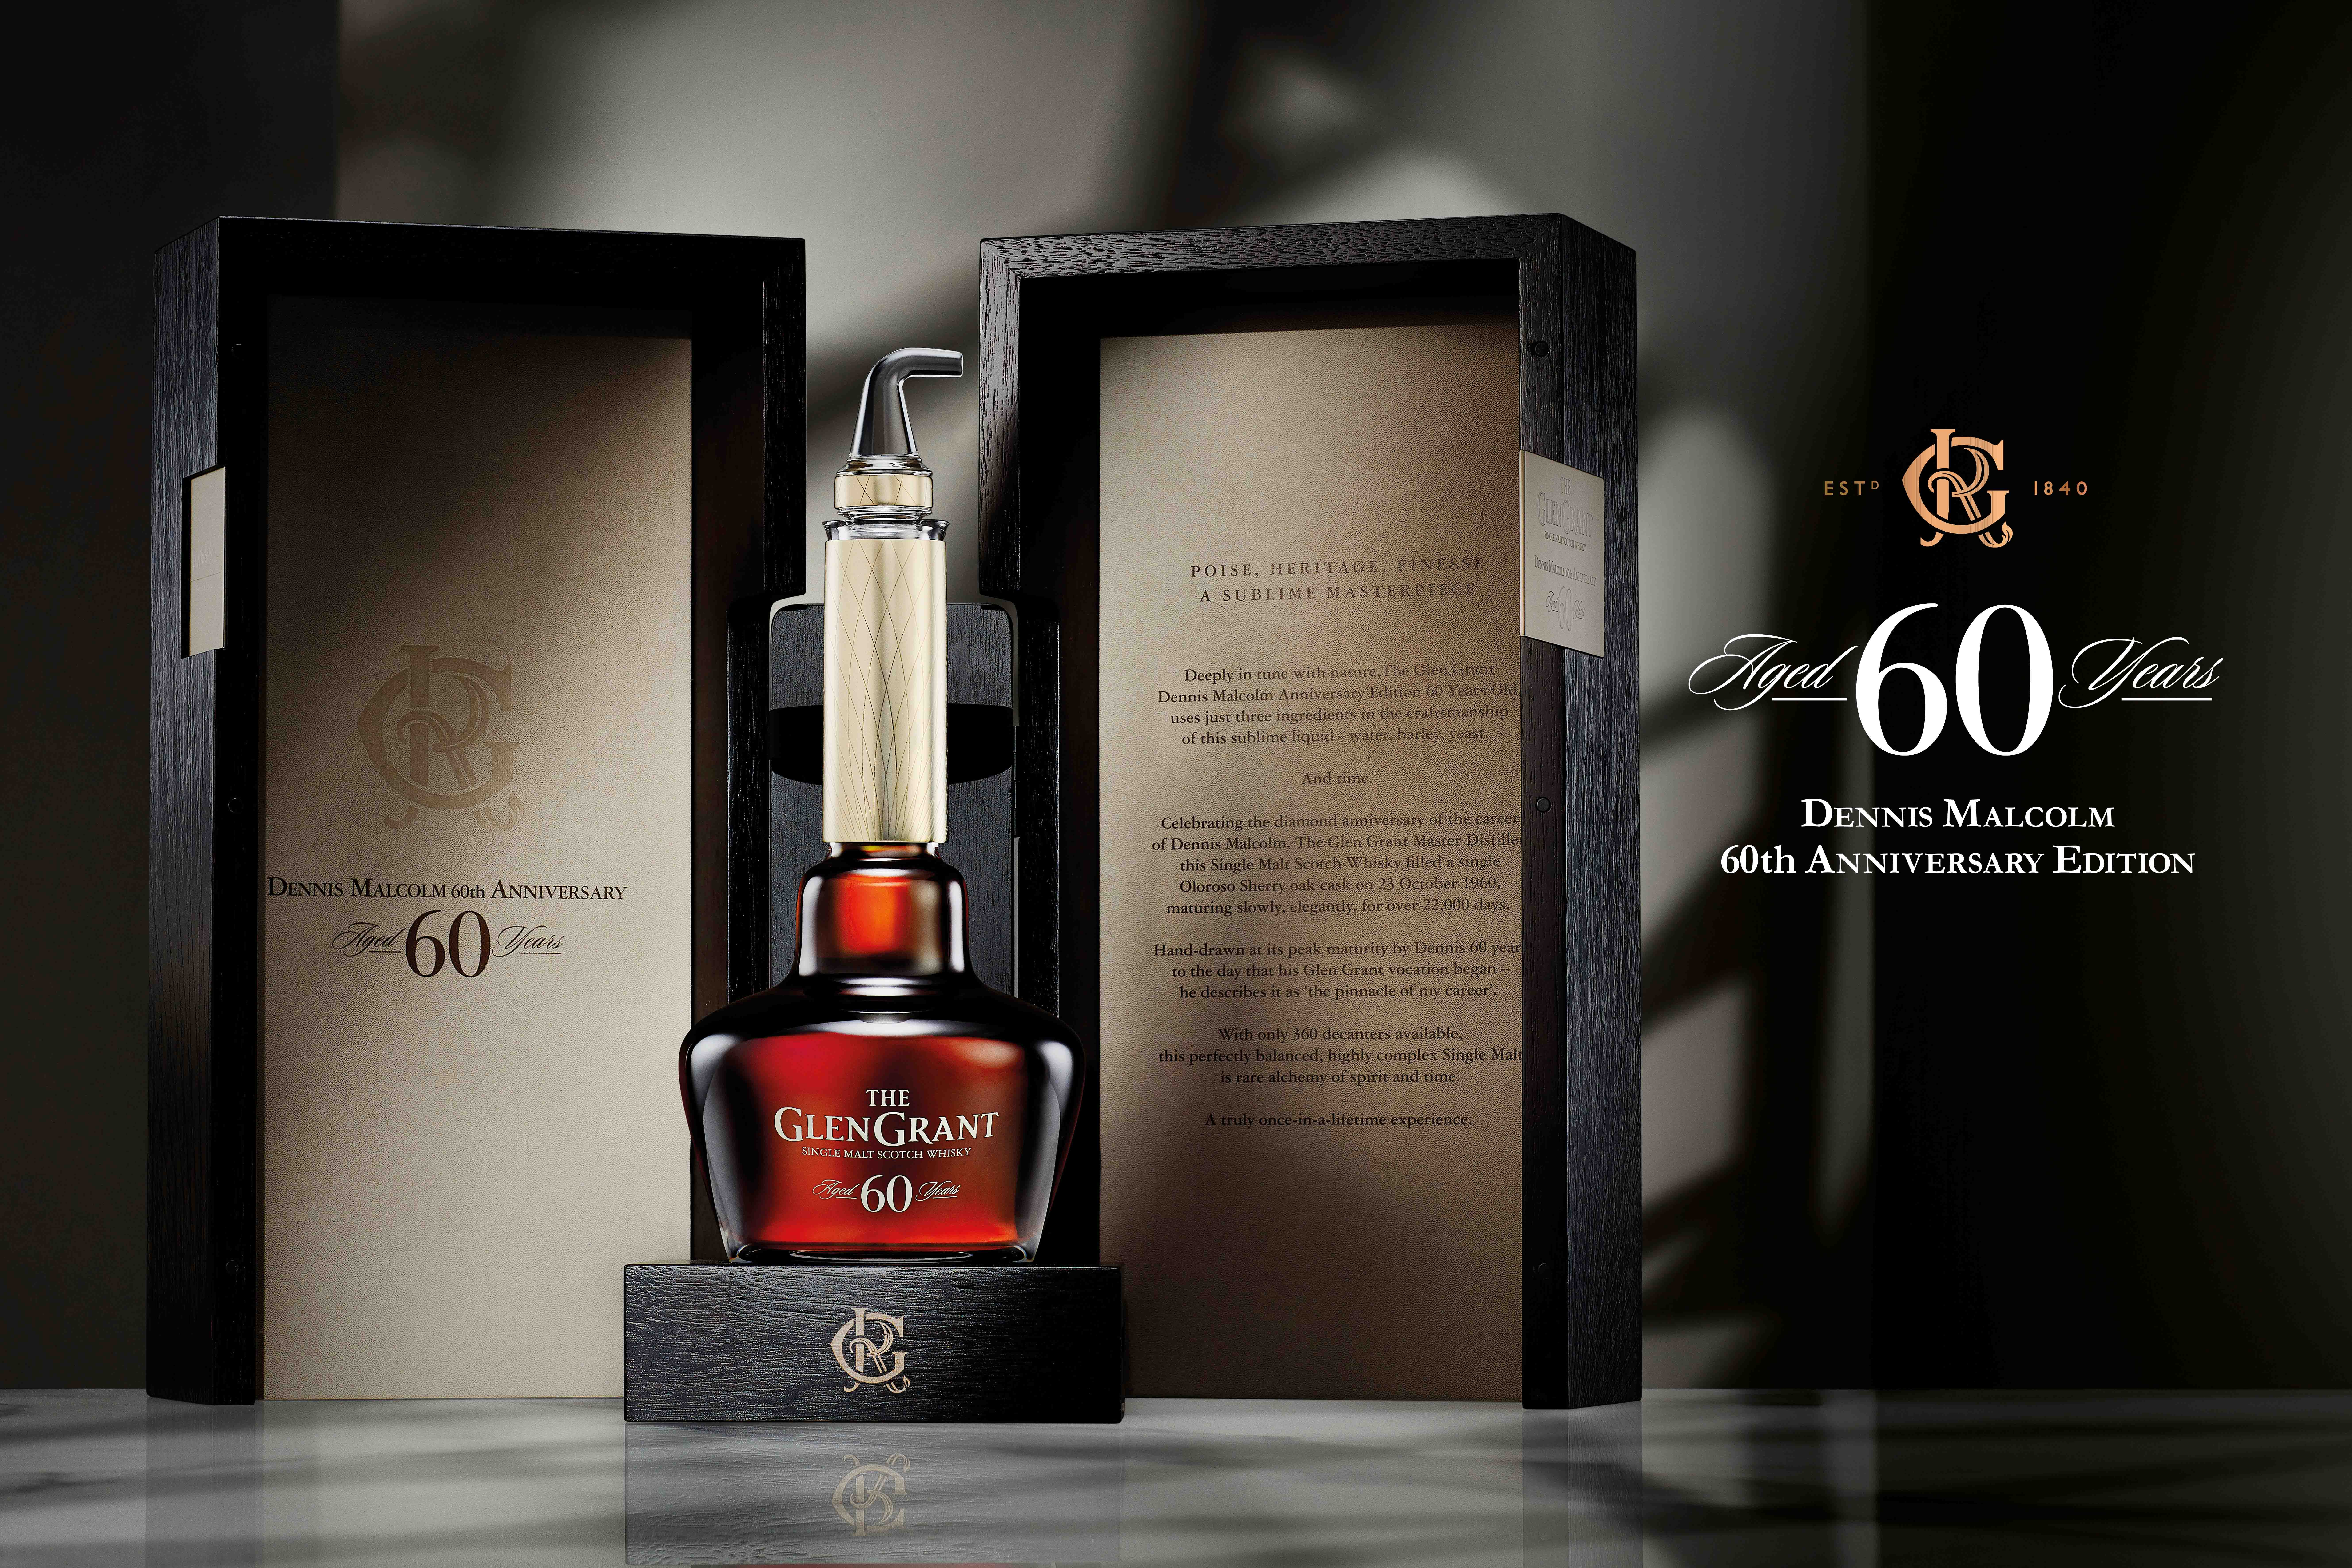 The Glen Grant® announces the release of the Dennis Malcolm 60th Anniversary Edition Aged 60 Years